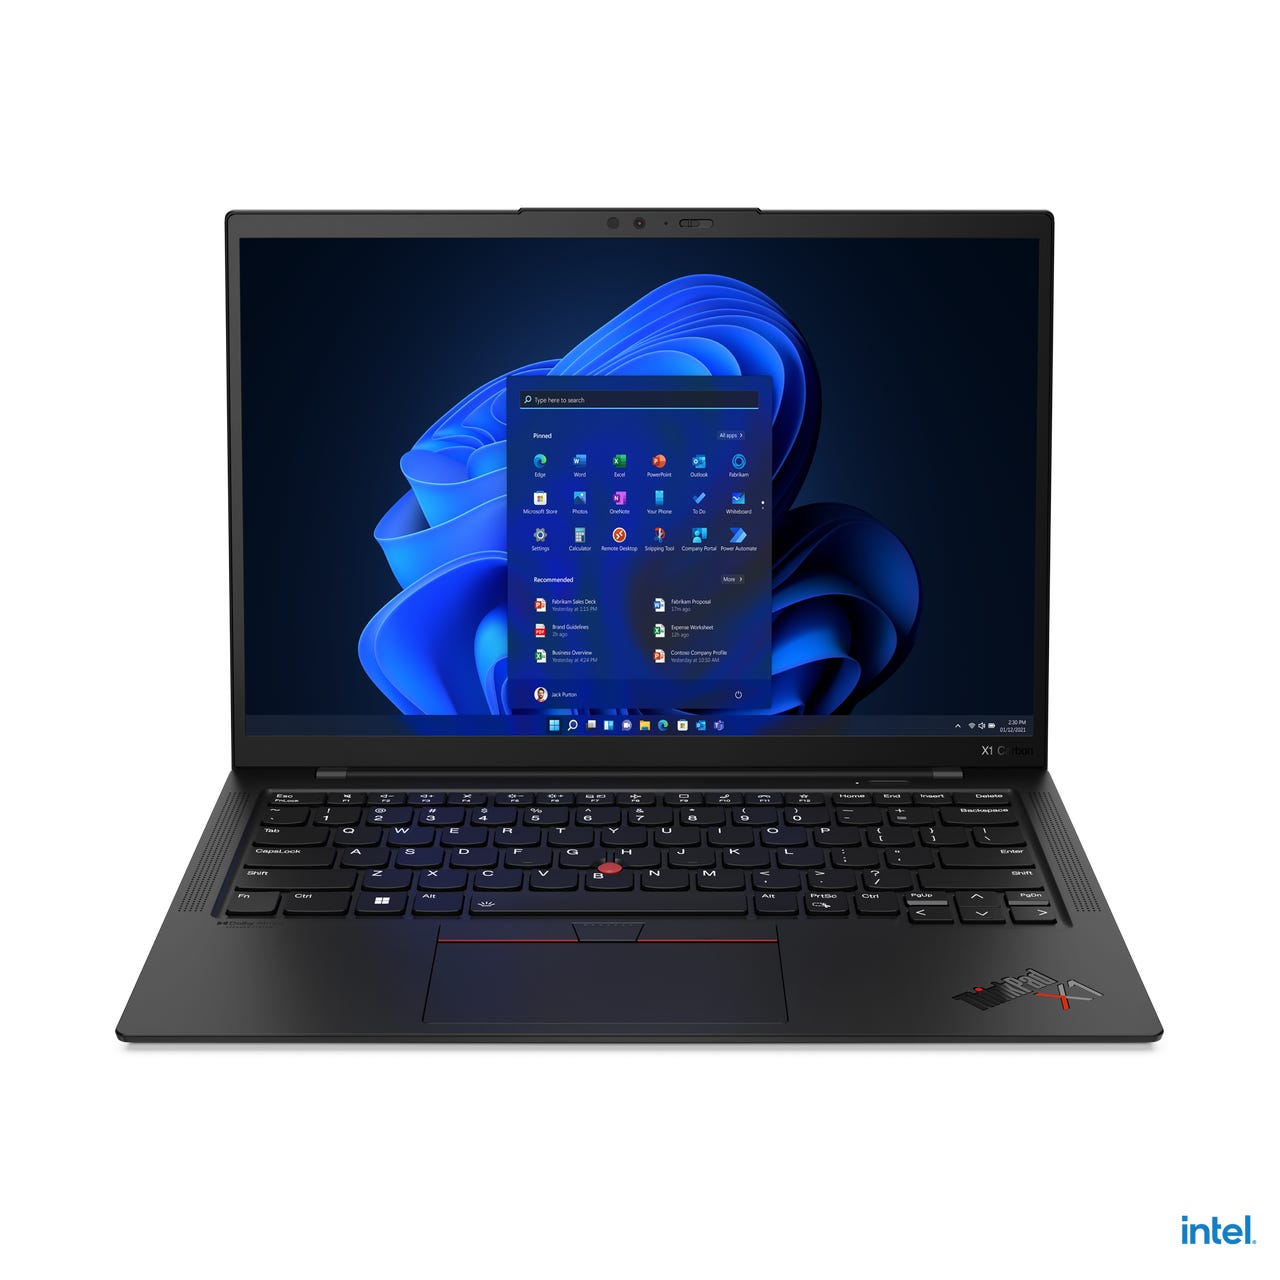 Lenovo Announces New Innovations in Gaming, Software, Visuals, and  Accessories for the Holidays